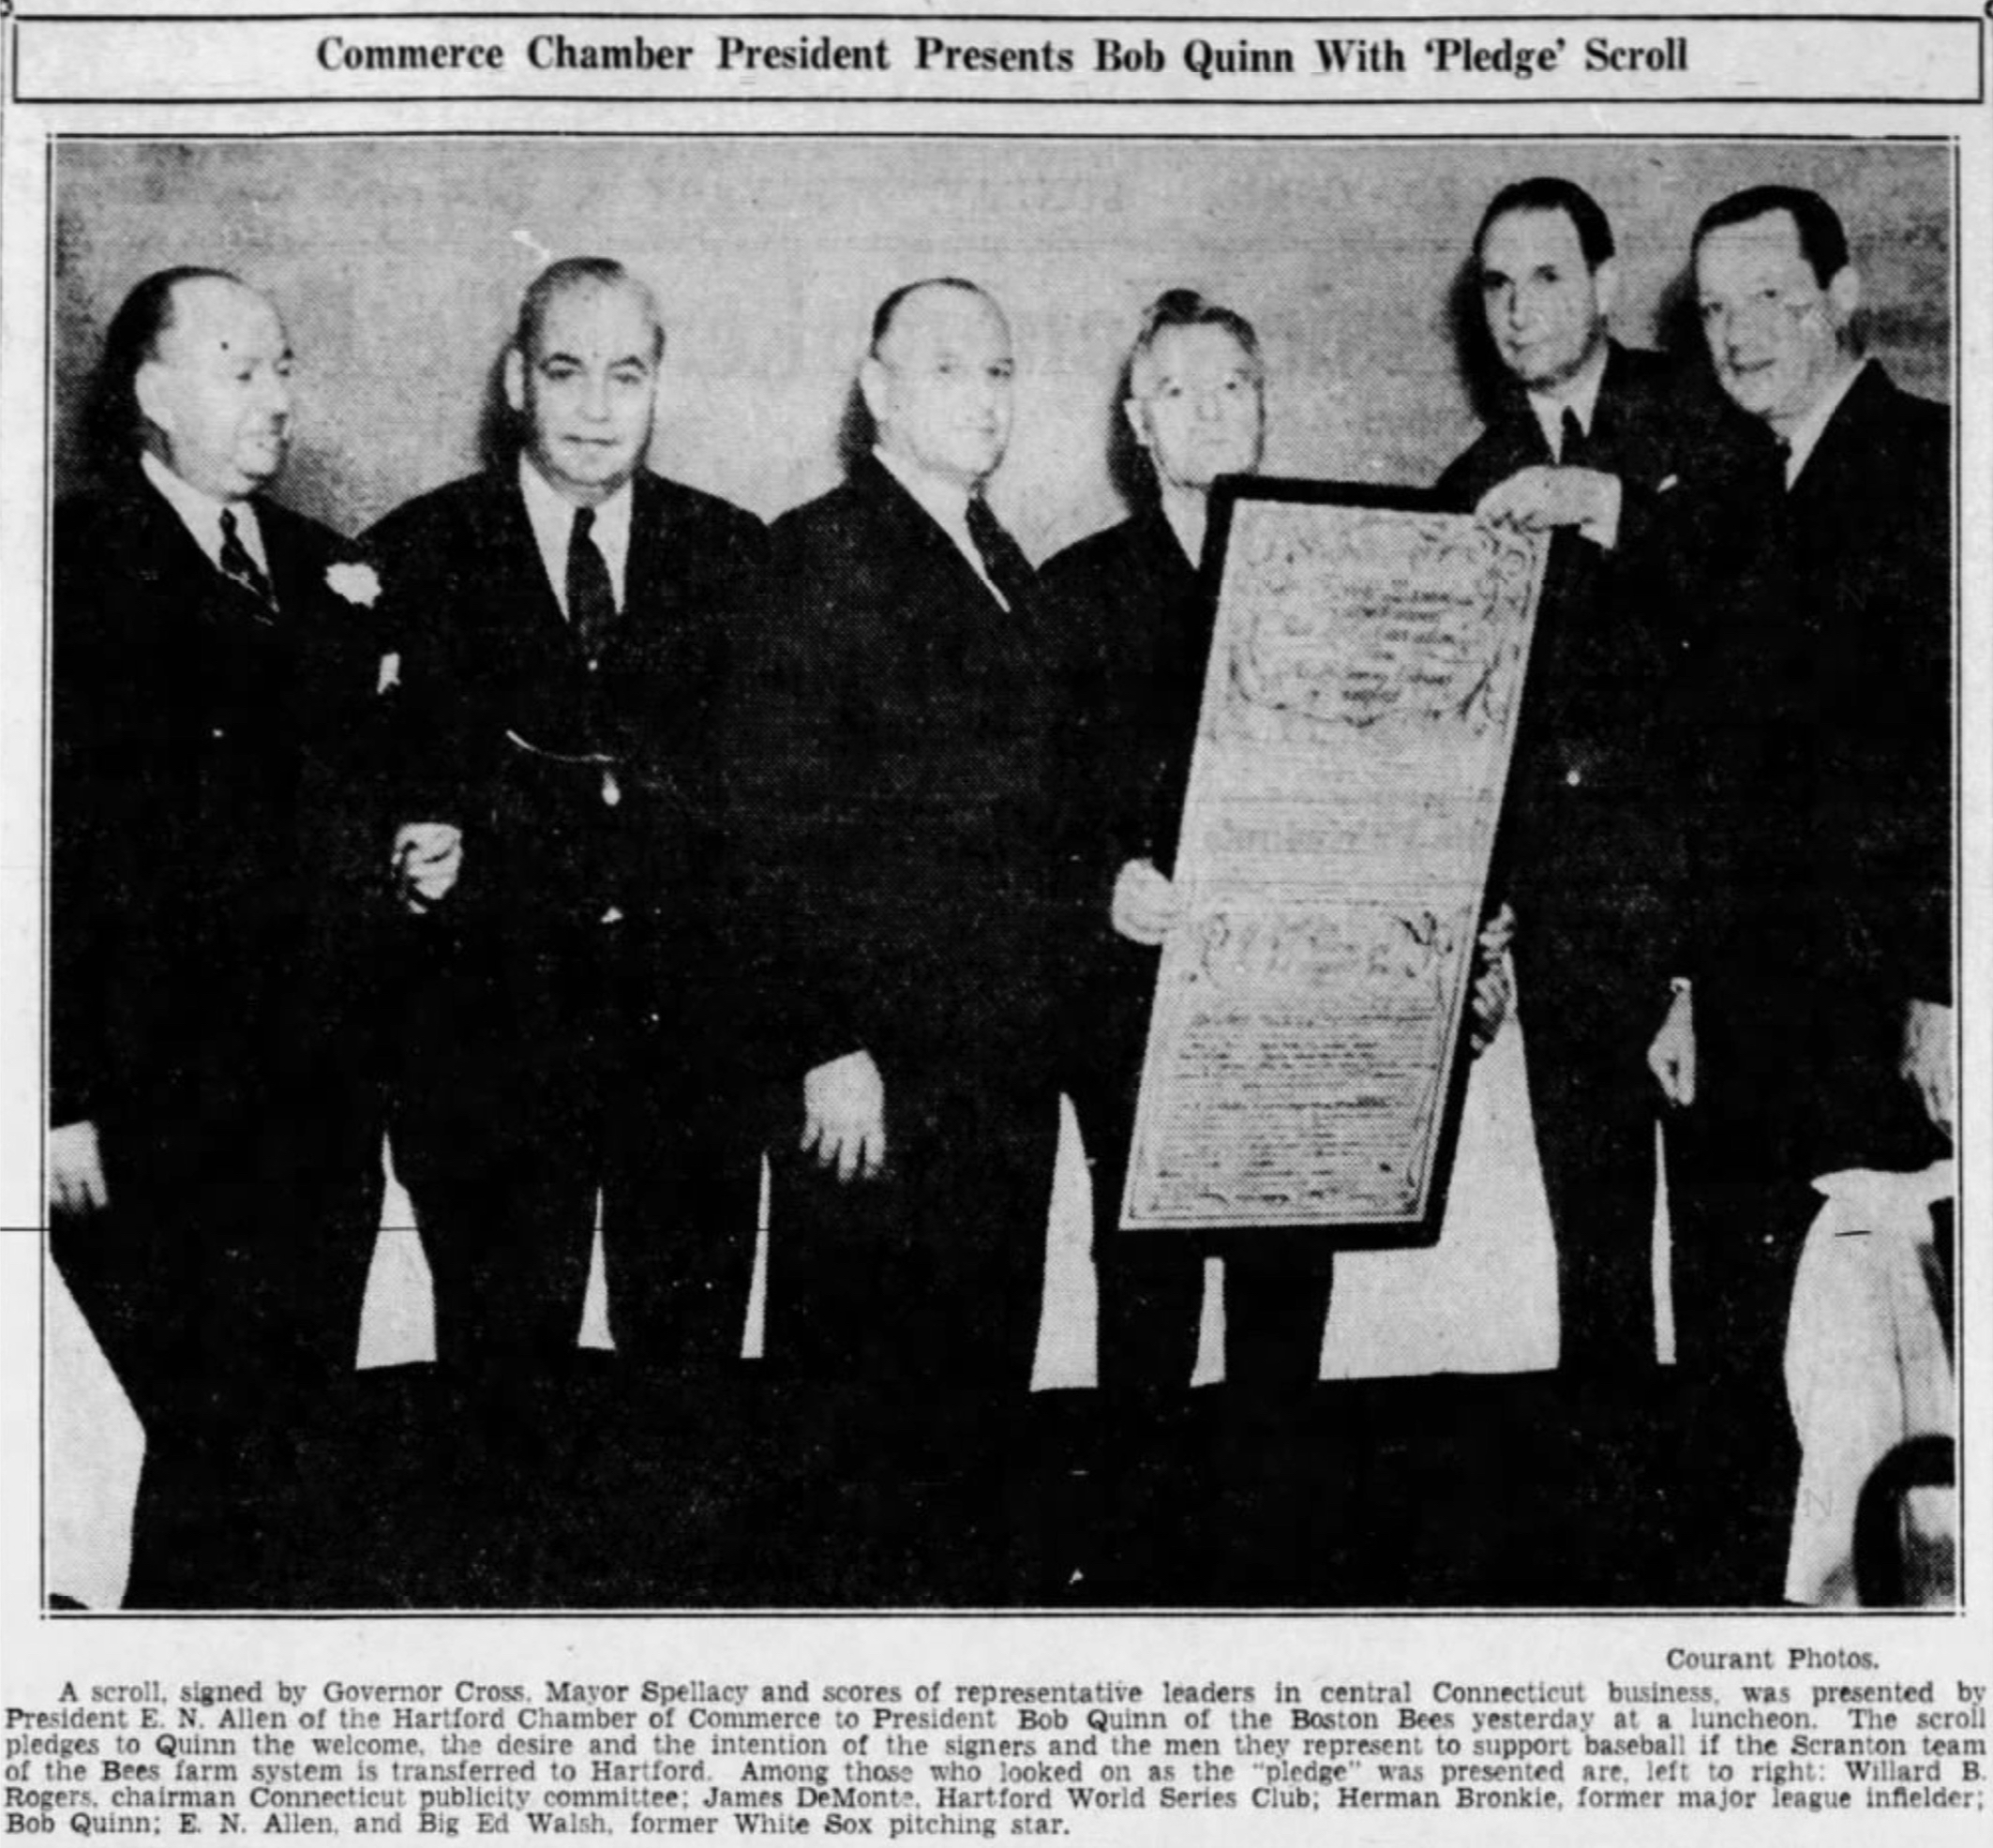 Hartford officials present the Boston Bees with an official pledge of support, 1938